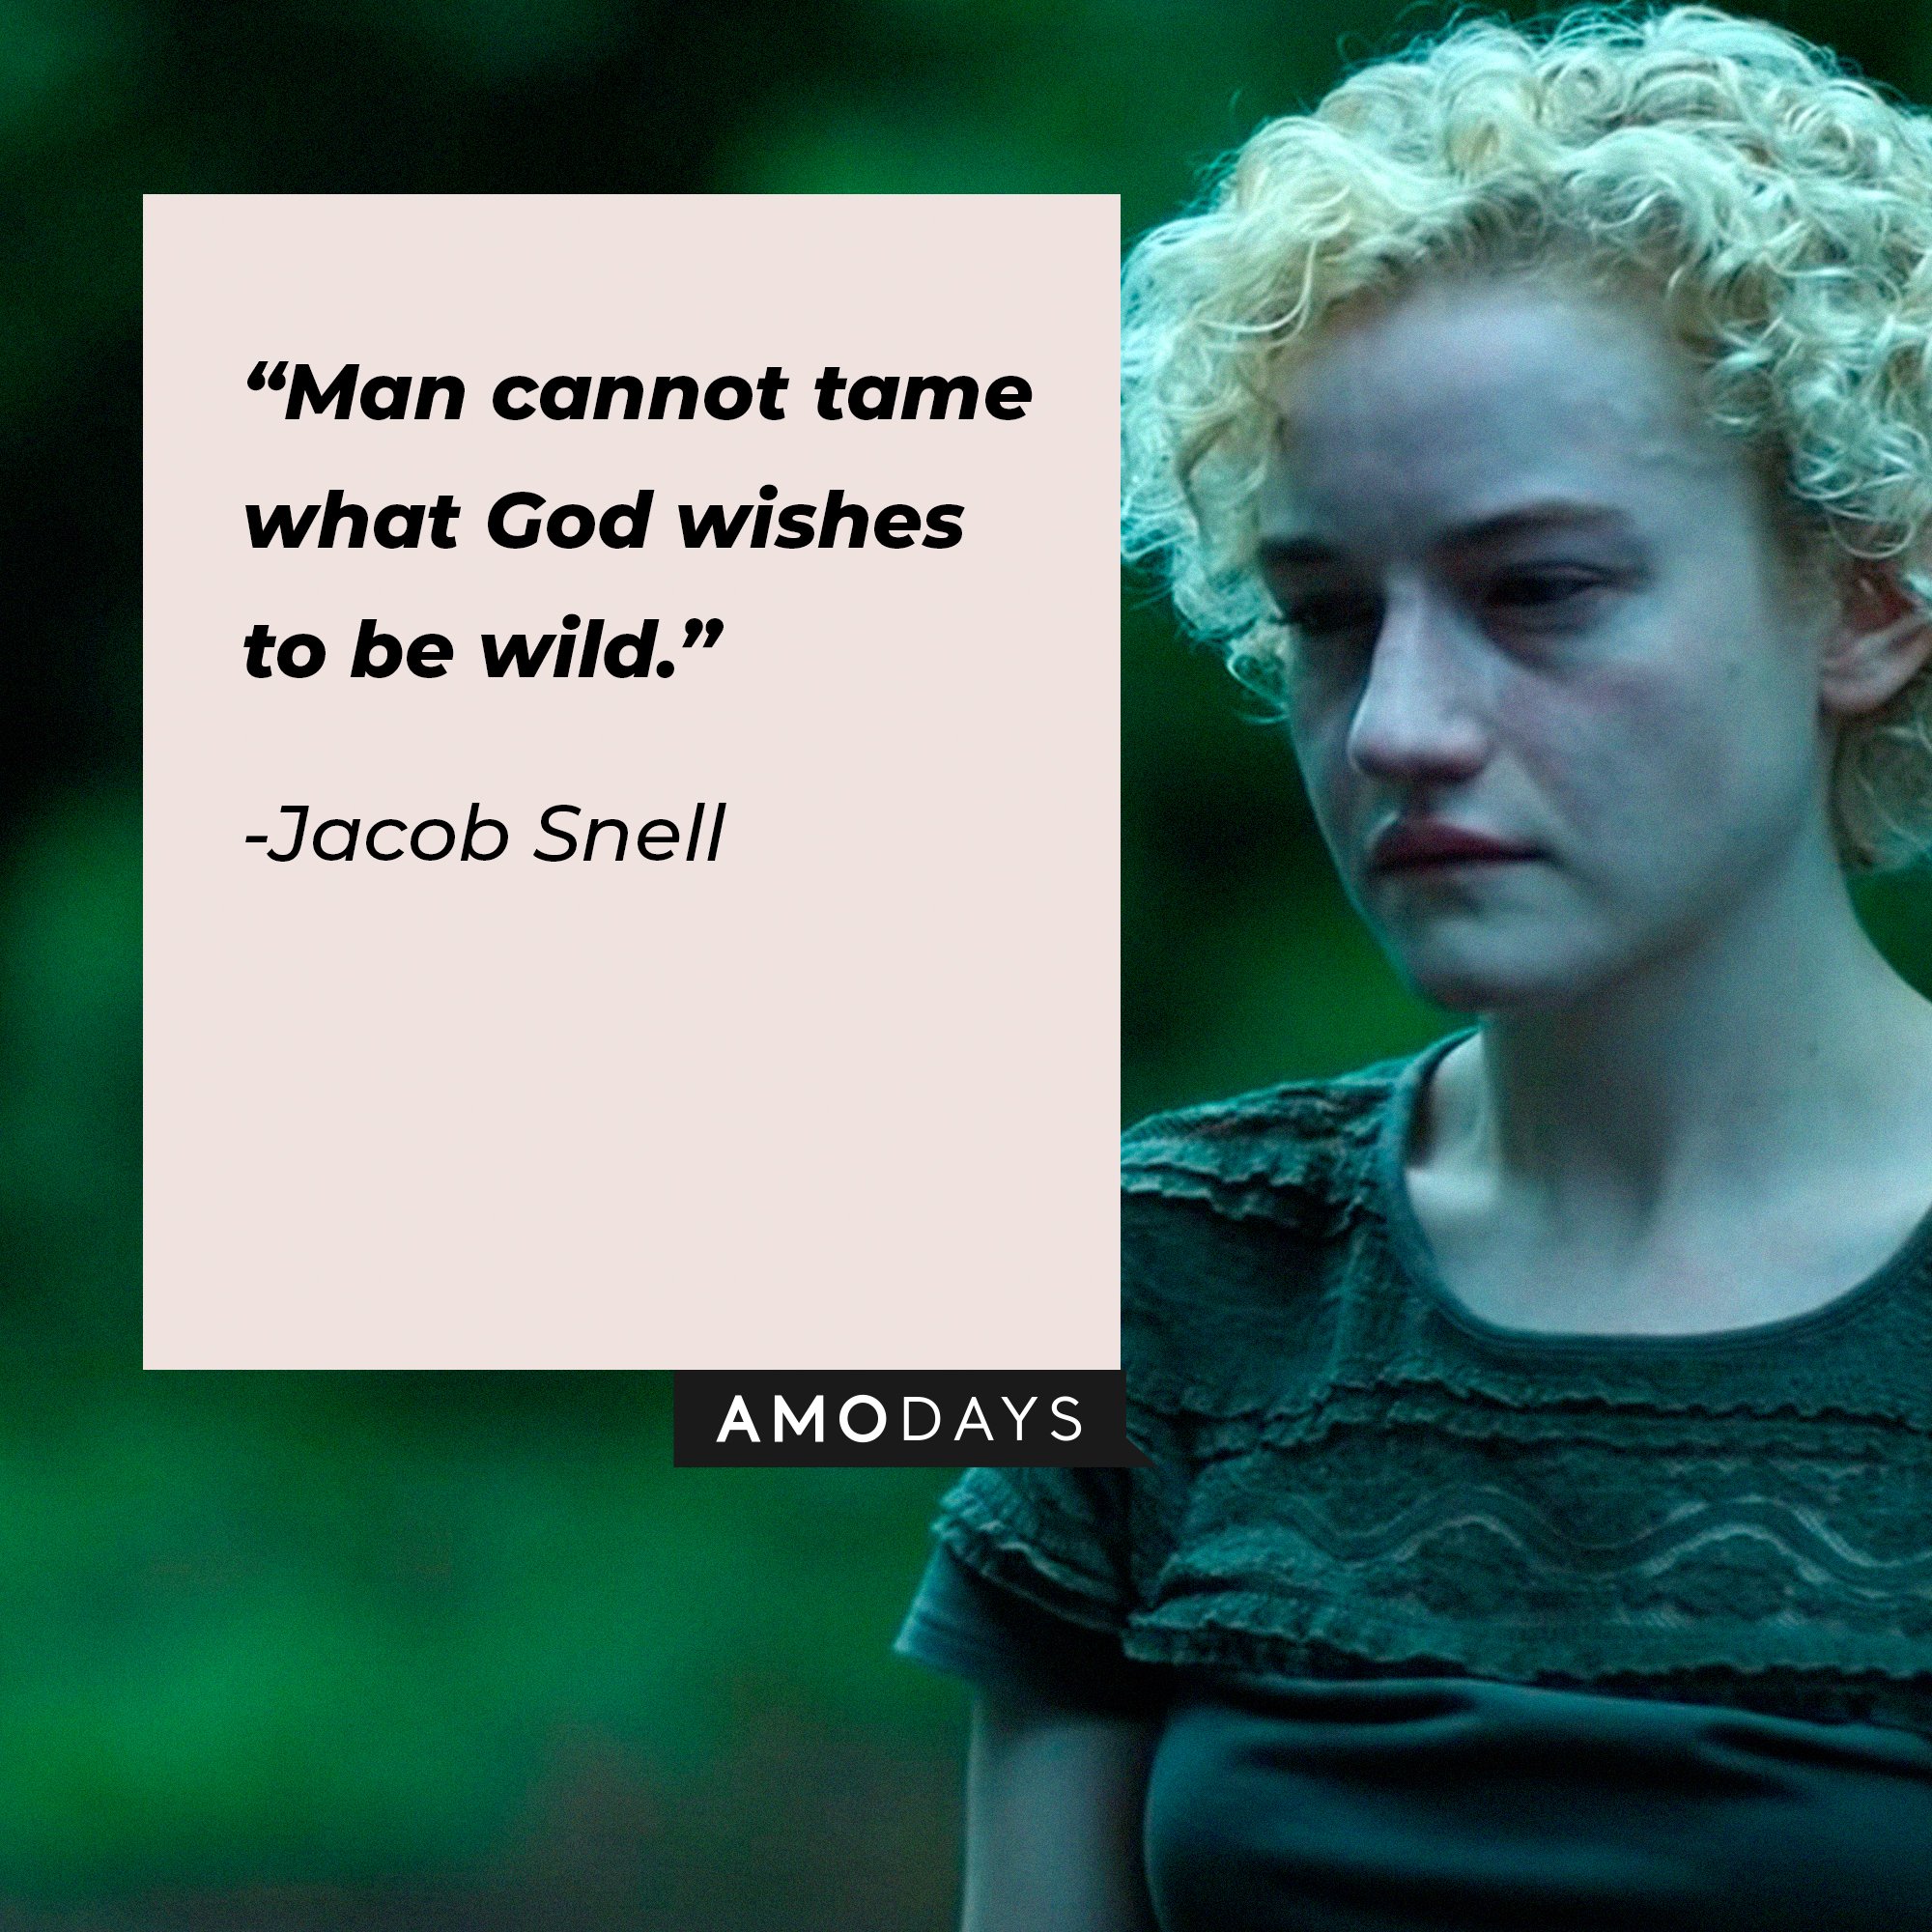 Jacob Snell's quote: “Man cannot tame what God wishes to be wild.” | Image: AmoDays